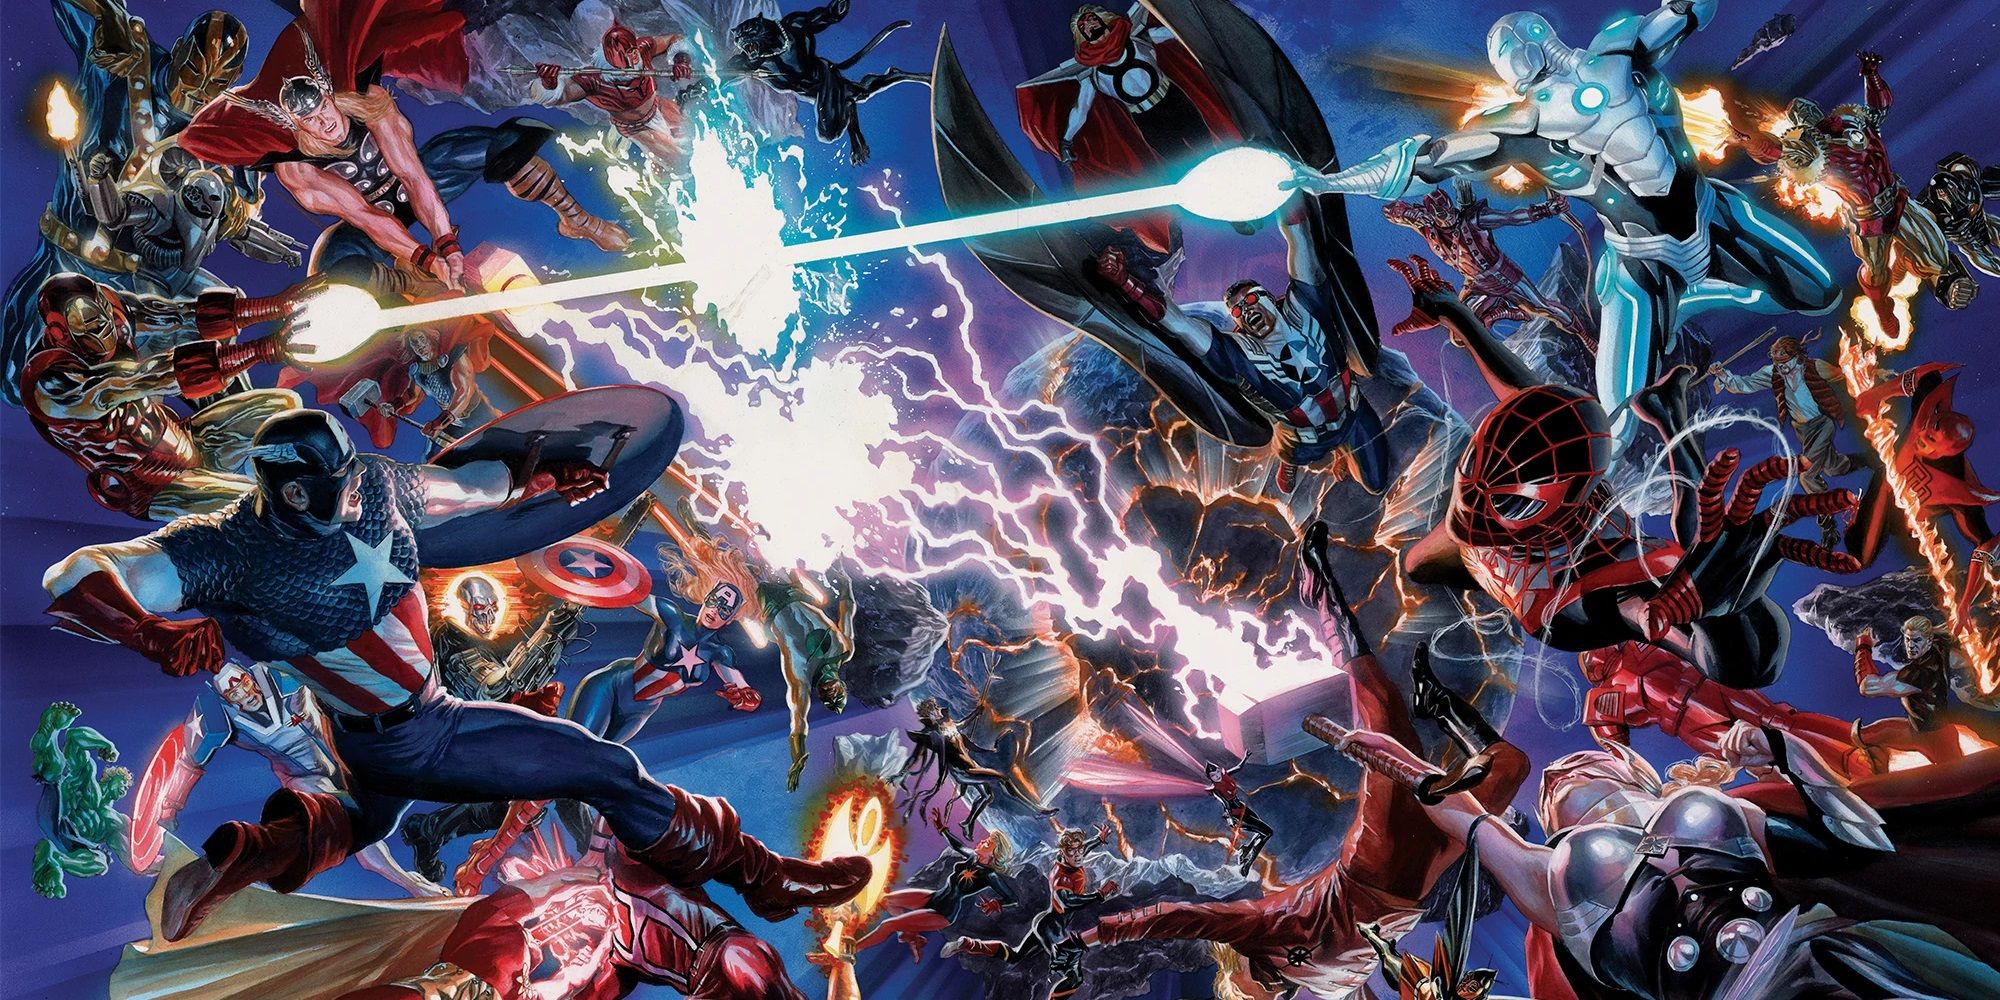 The cover art from Marvel's Secret Wars comic book